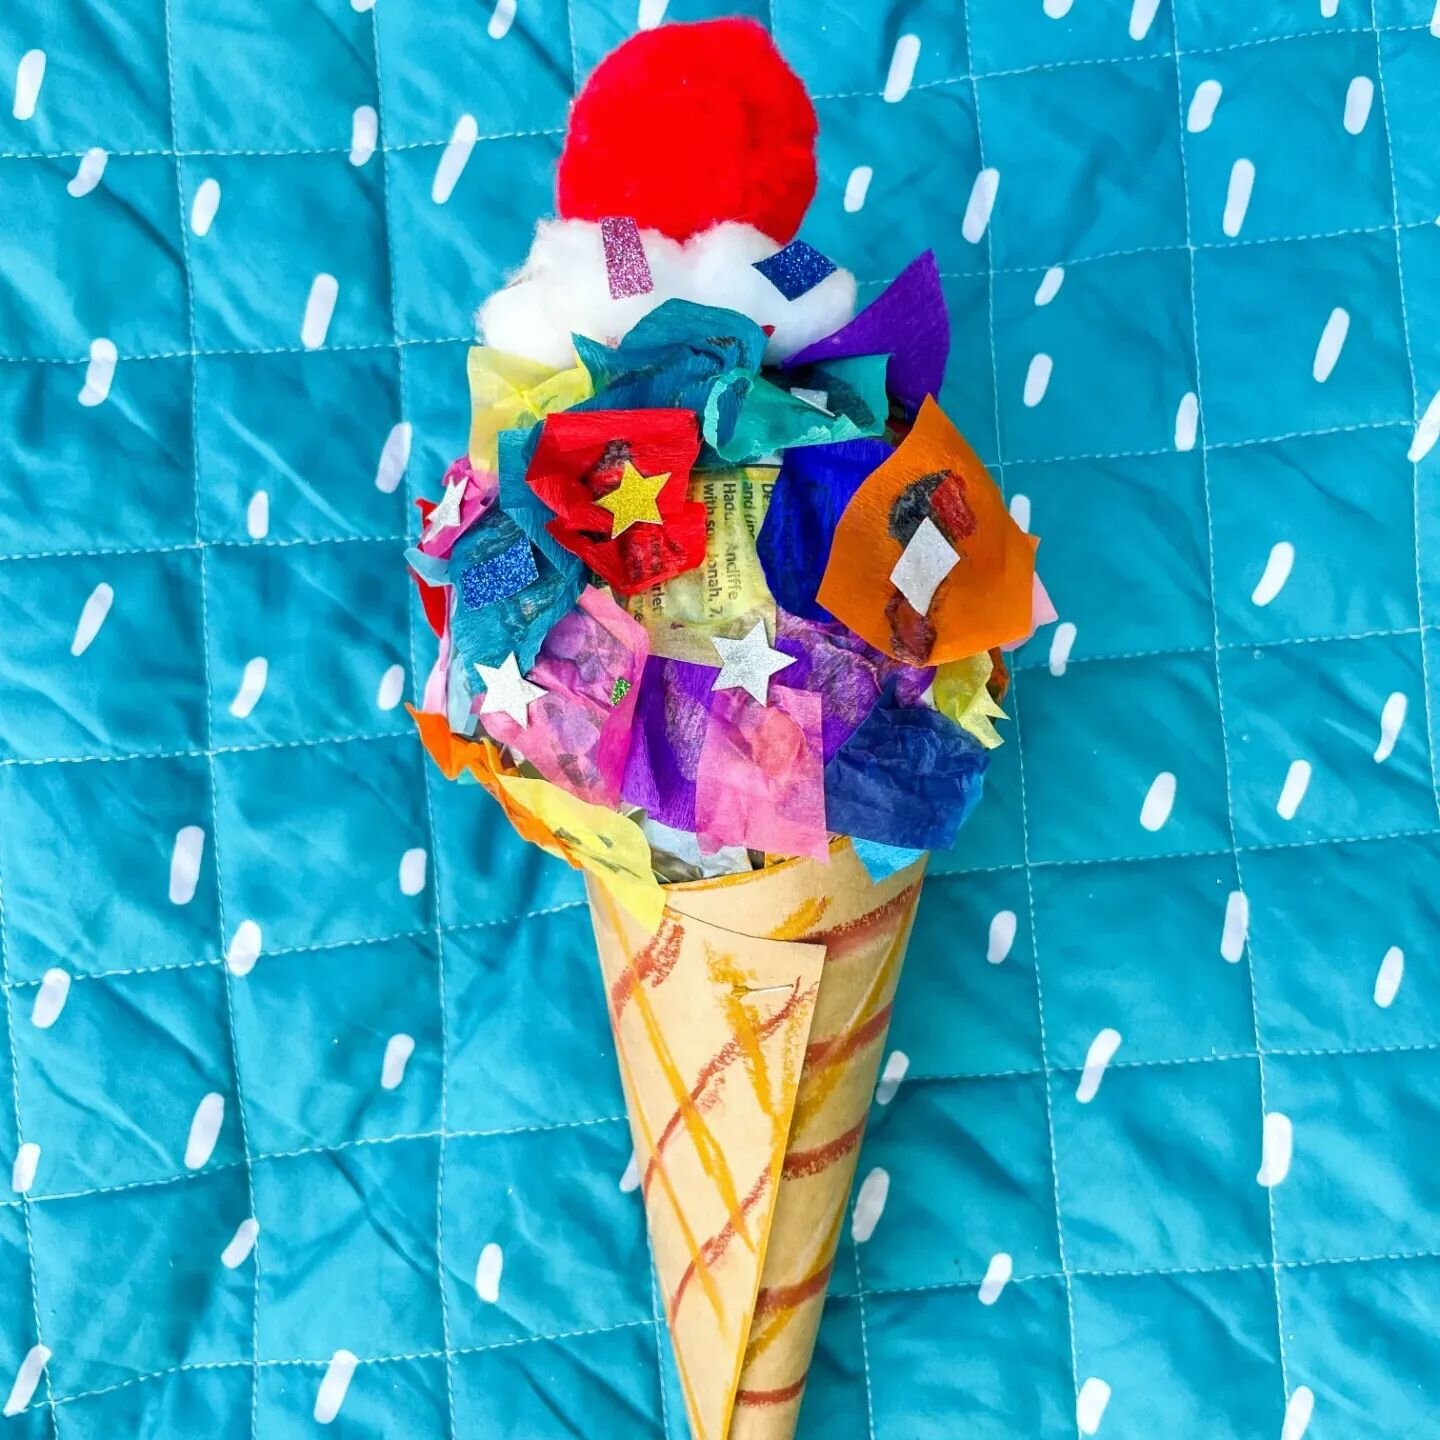 This week we have Giant Ice Creams, Sleeping Owls and Seahorses at @westvillage_brisbane and on Friday we're making Clay Min Lands and Creatures 👀 🌳🎨

Grab a pass for West End here: https://creative-kids-brisbane.square.site/
Book a ticket for Fri